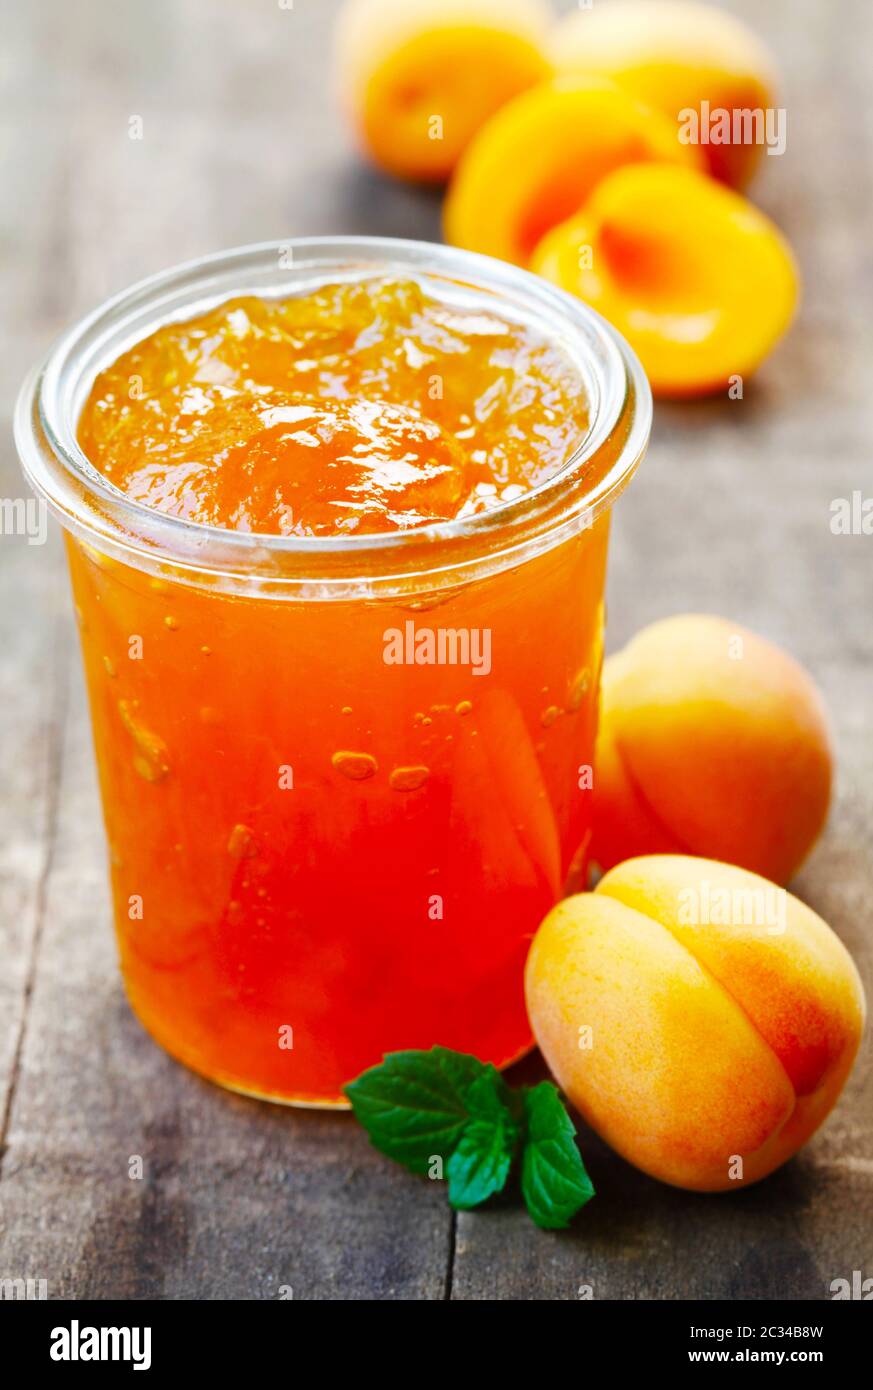 A Jar Of Apricot Jam On A Wooden Background Stock Photo